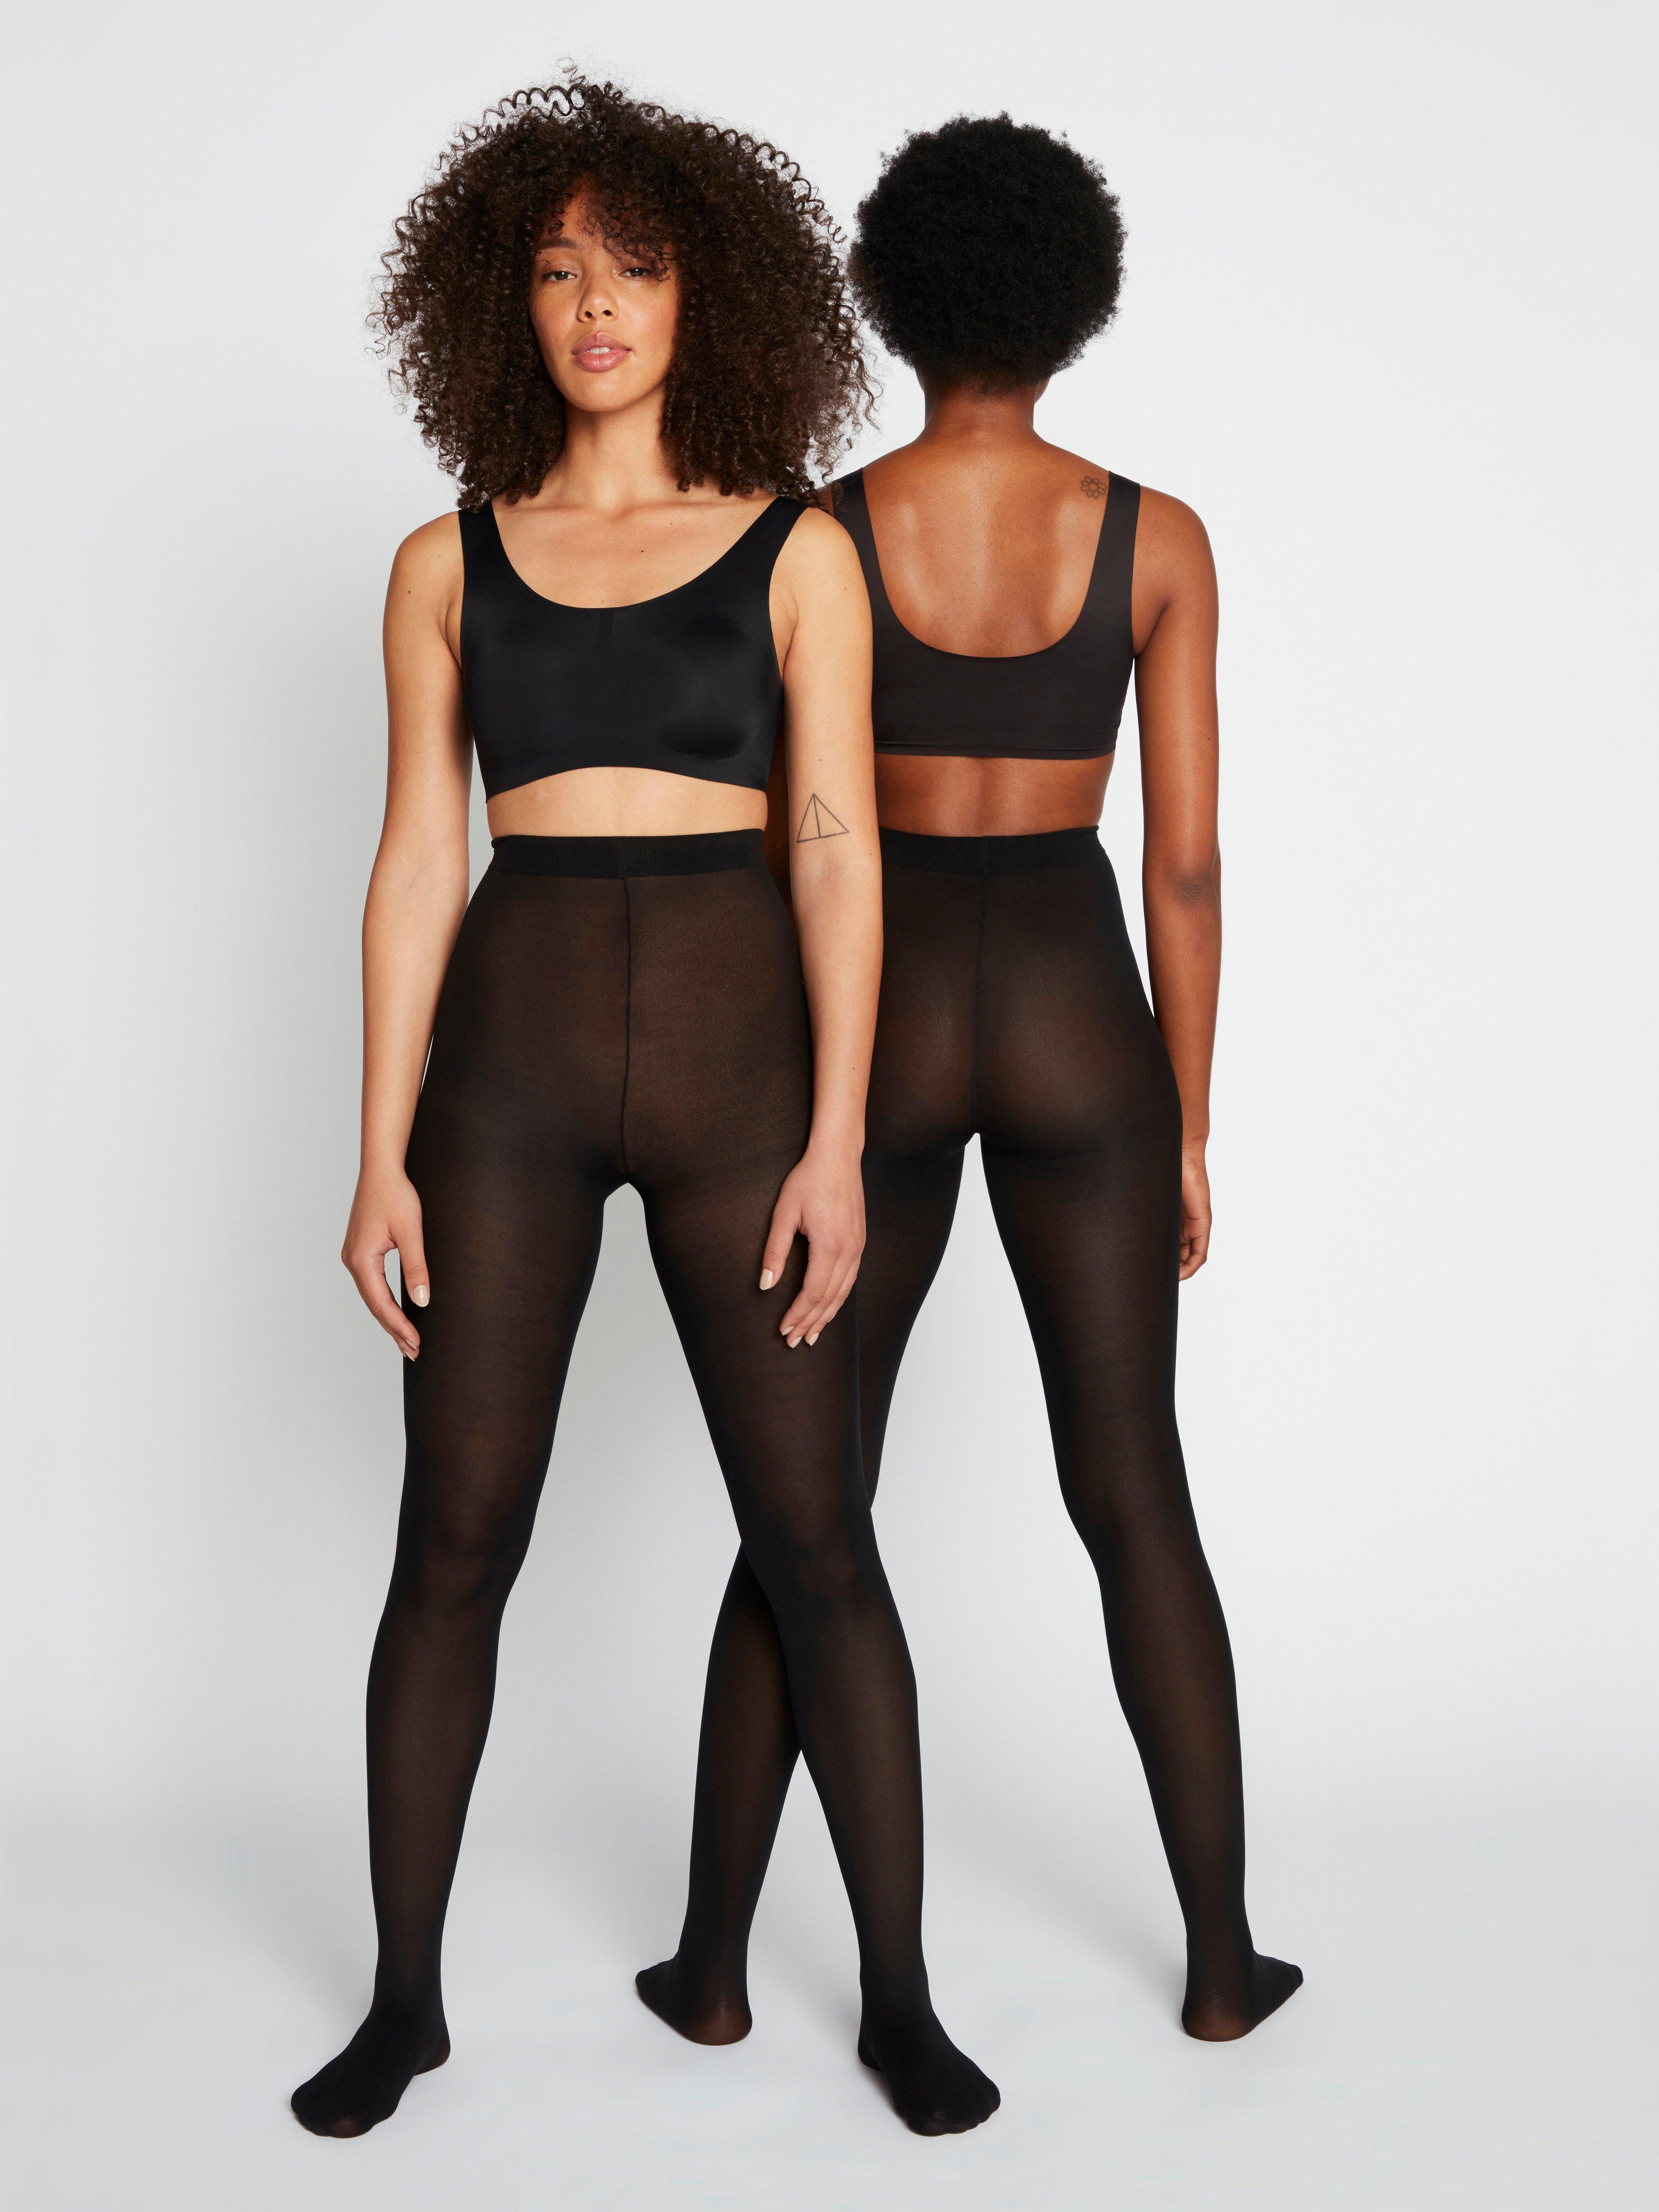 80 Denier Tights Two Pack